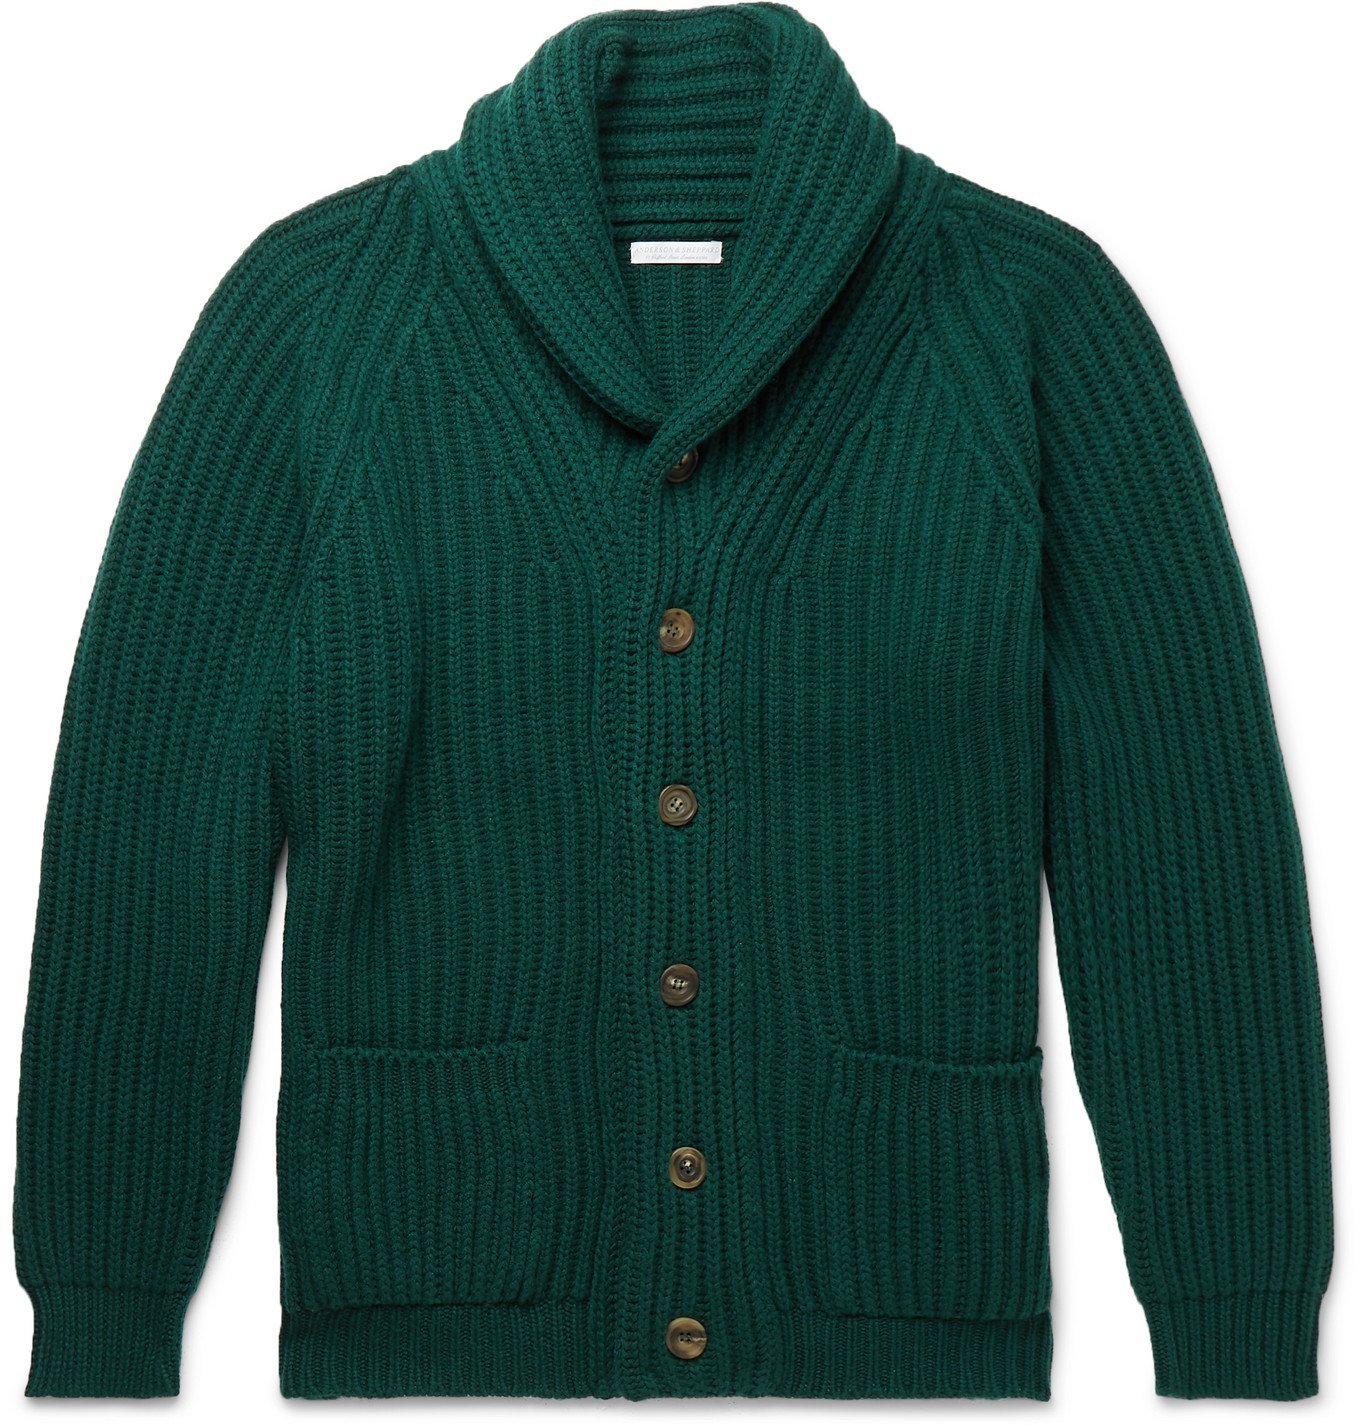 Anderson & Sheppard - Shawl-Collar Ribbed Cashmere Cardigan - Green ...